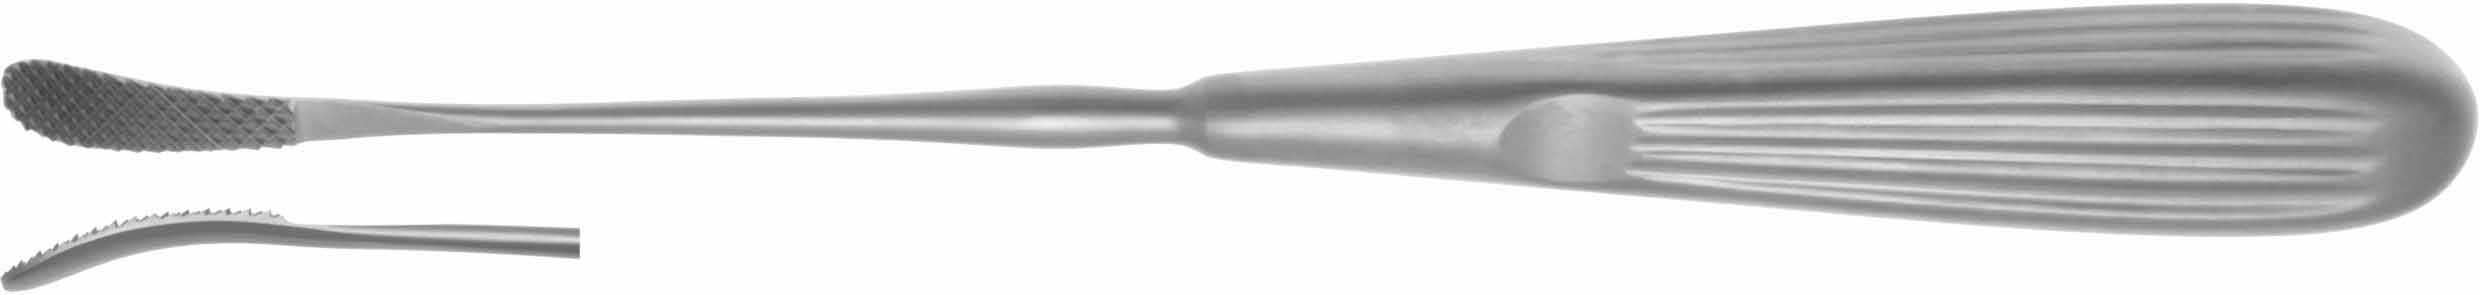 AUFRICHT GLABELLA NASAL RASP 210MM, WIDTH 9MM, DOWN AND UP CUTTING 